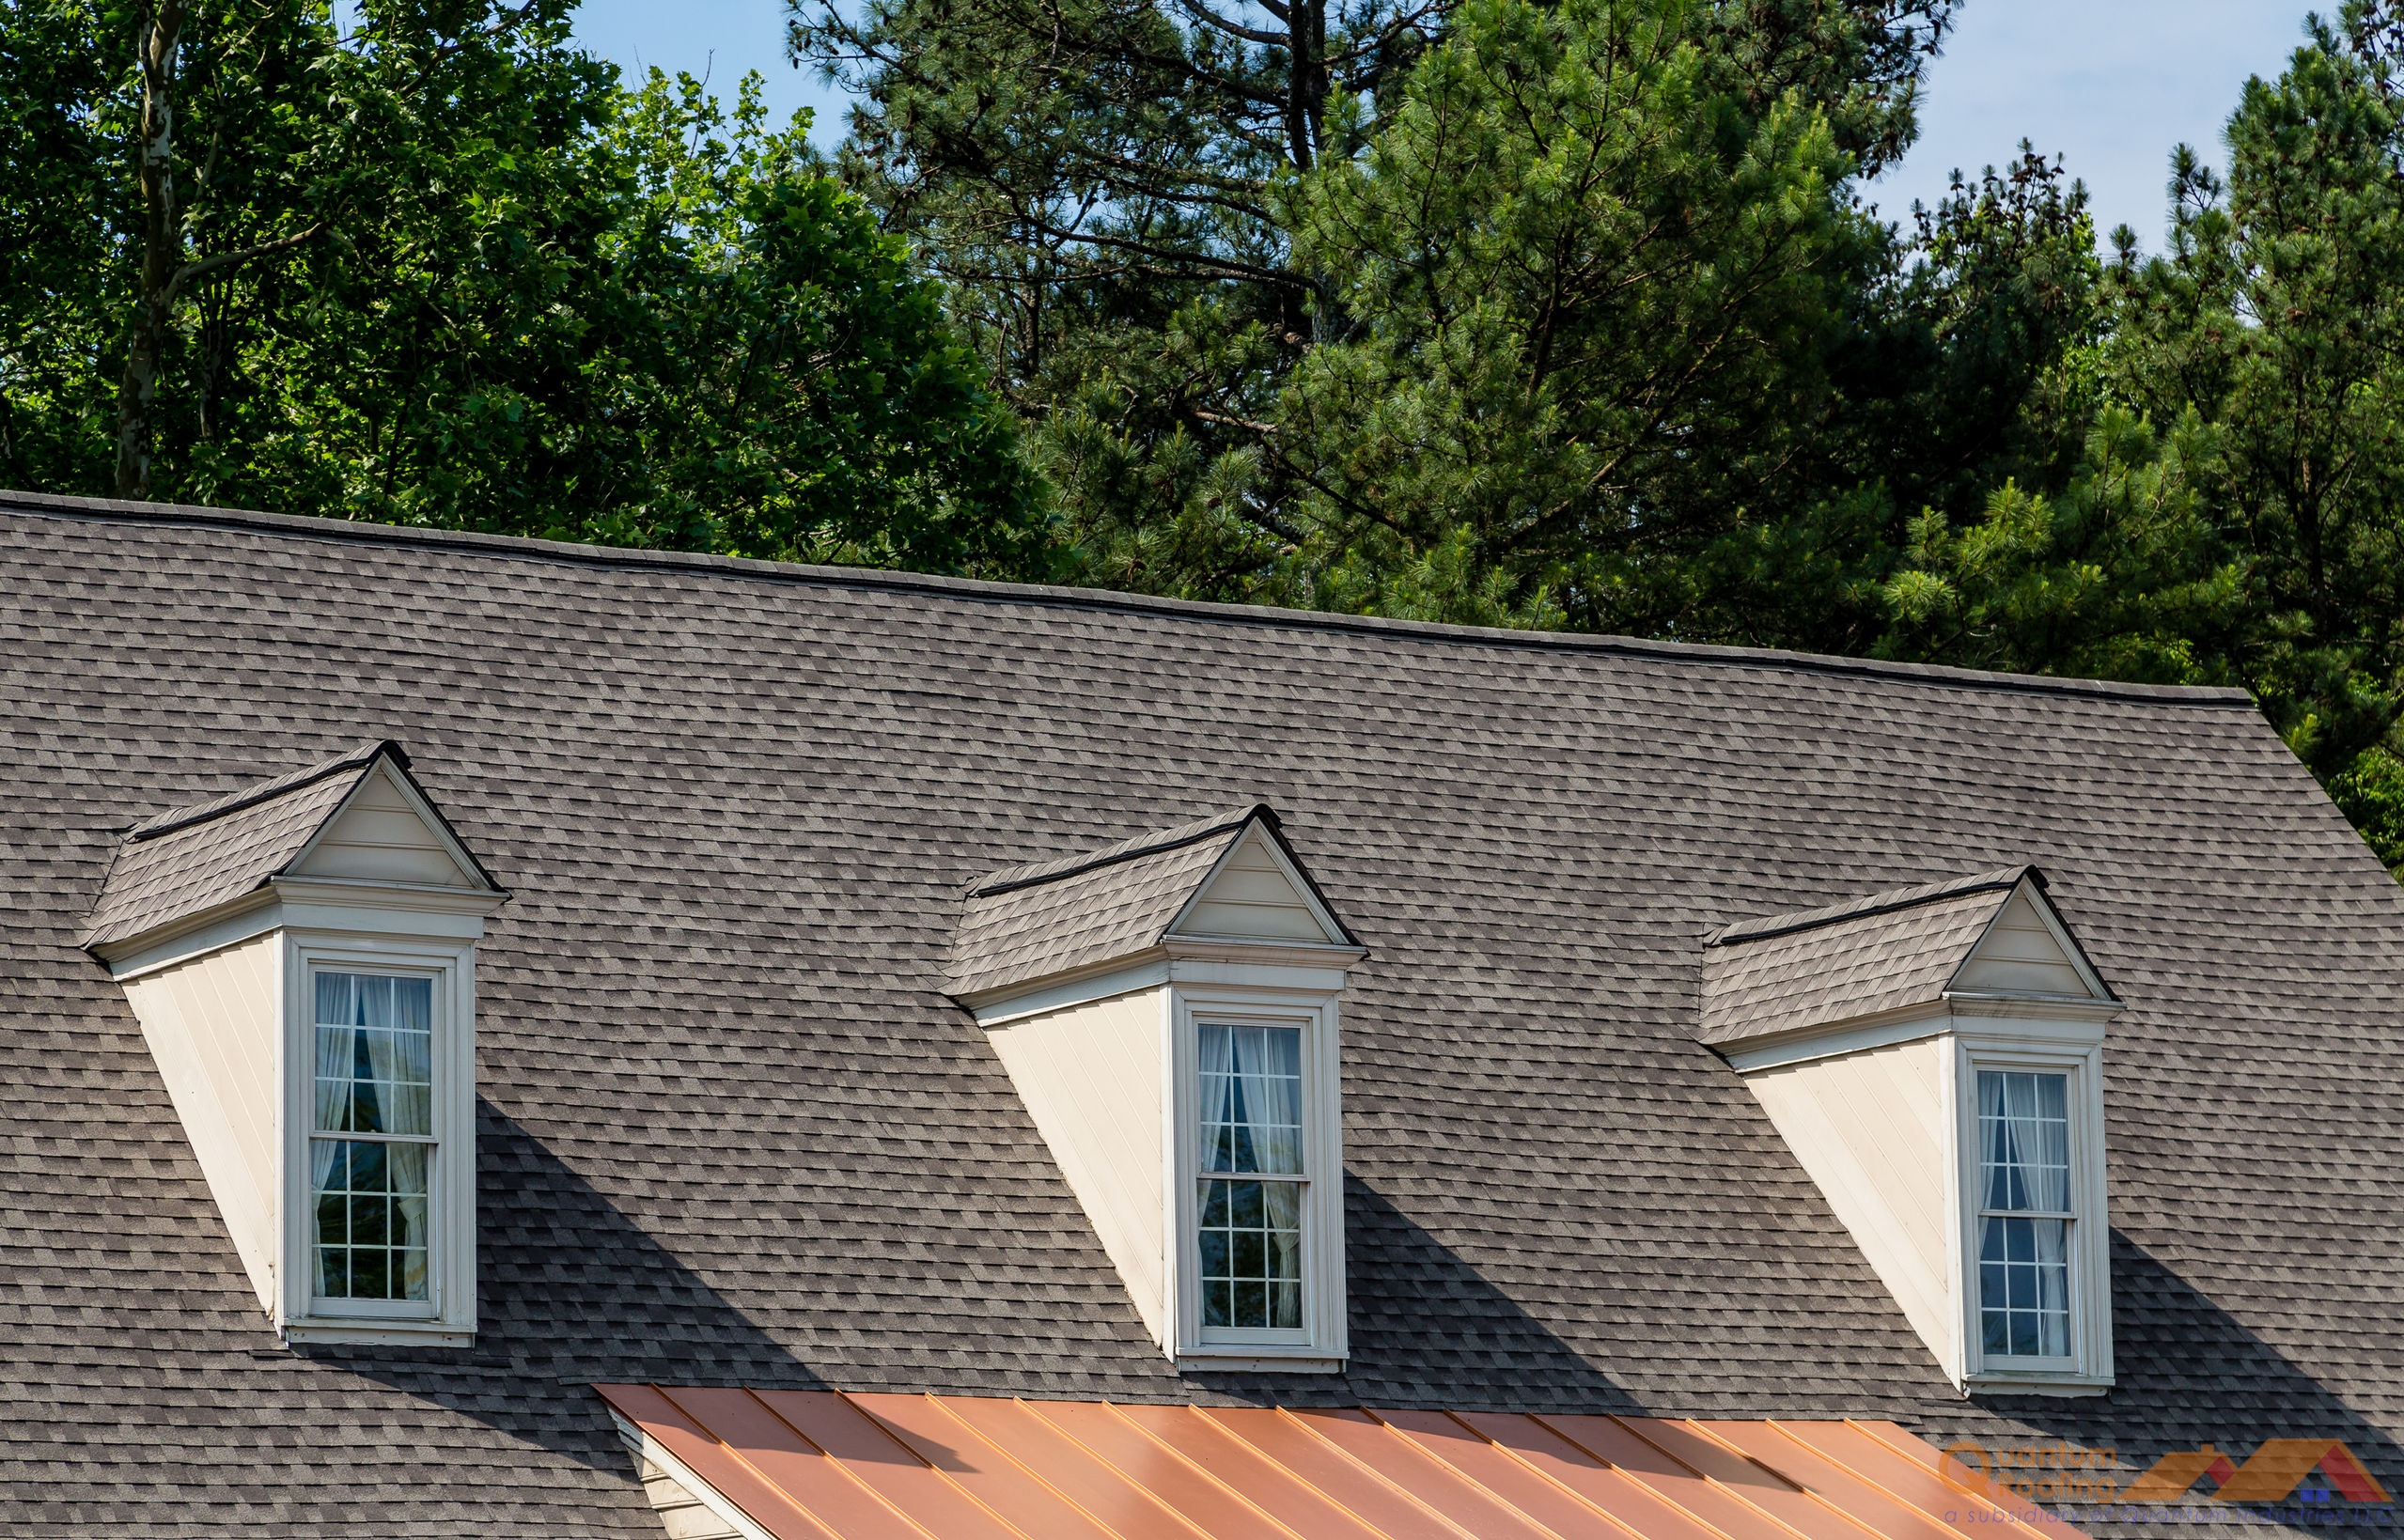 What are asphalt roof shingles made of?